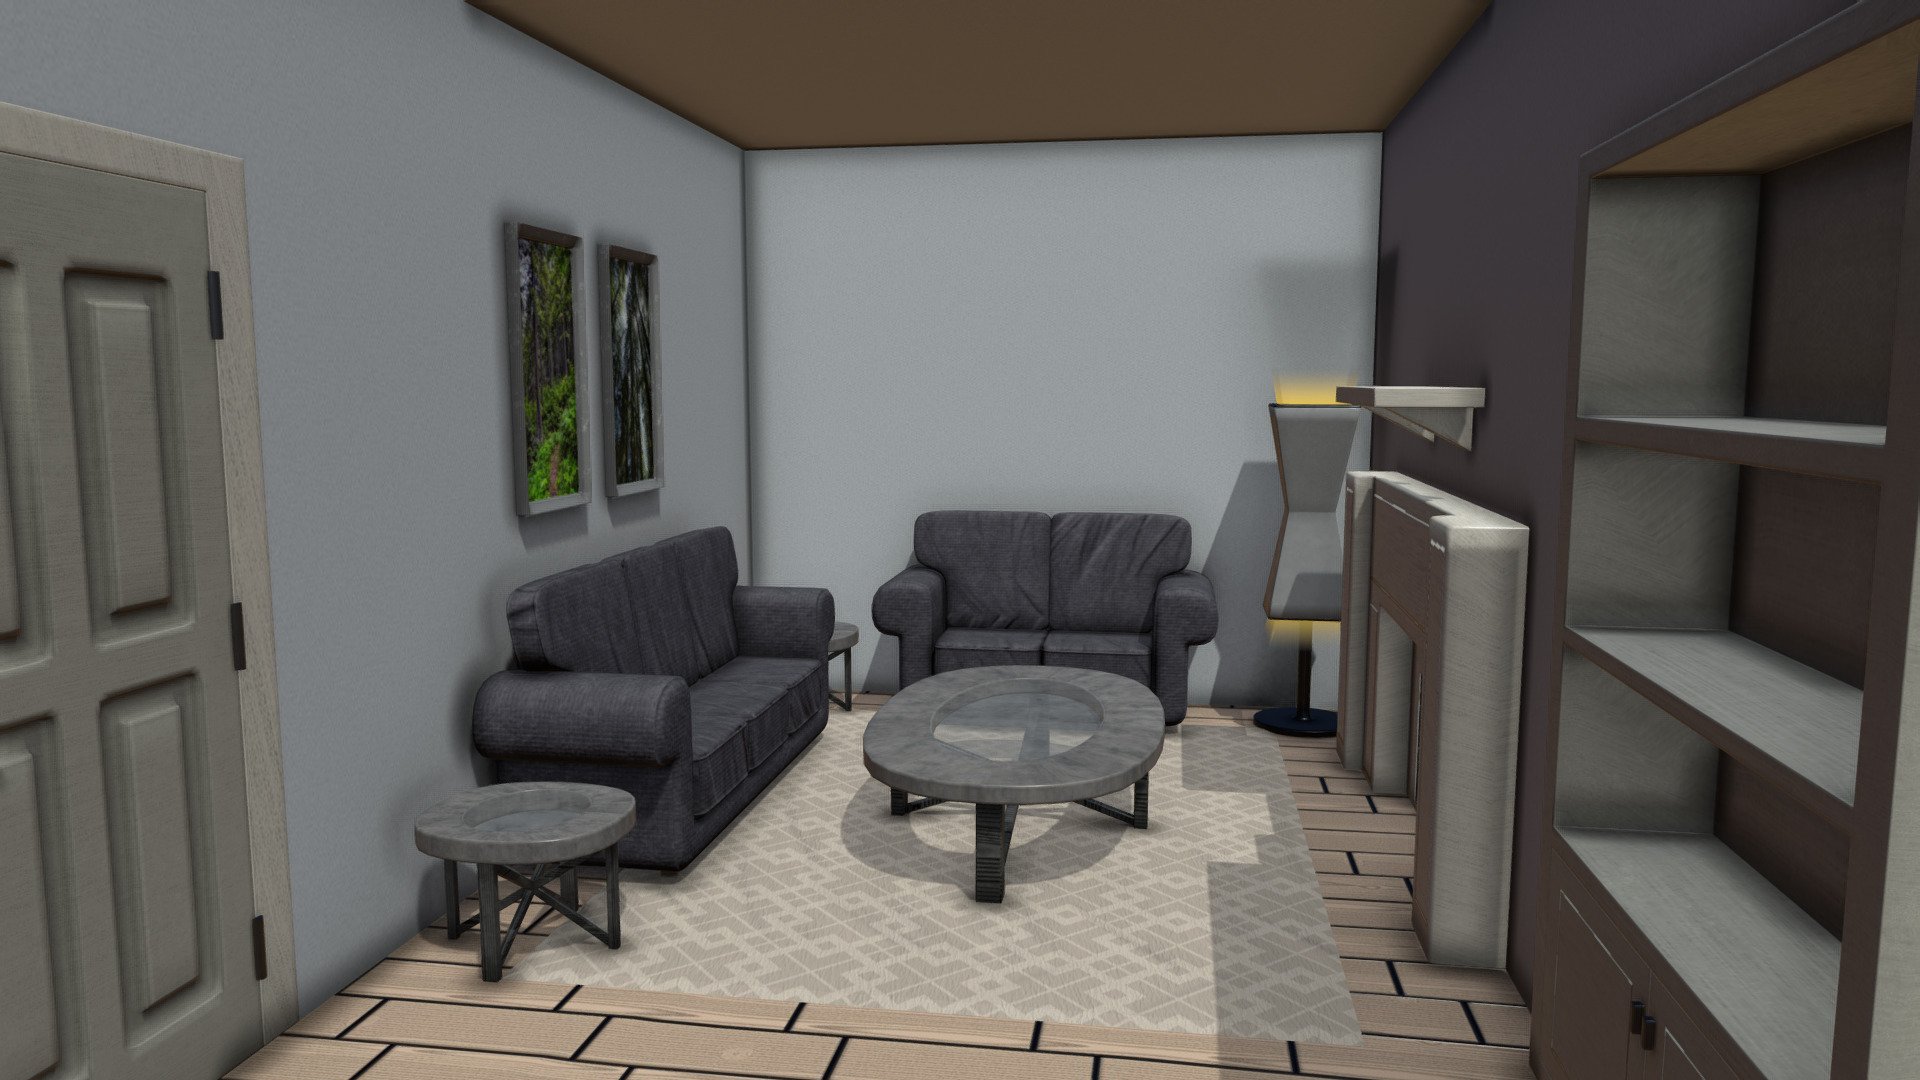 Living room pack with textures compatible with Unity 5 and Unreal Engine with the texture size of 2048x

Resolution: 2048x
File format: FBX - Living Room - Buy Royalty Free 3D model by powers28 3d model